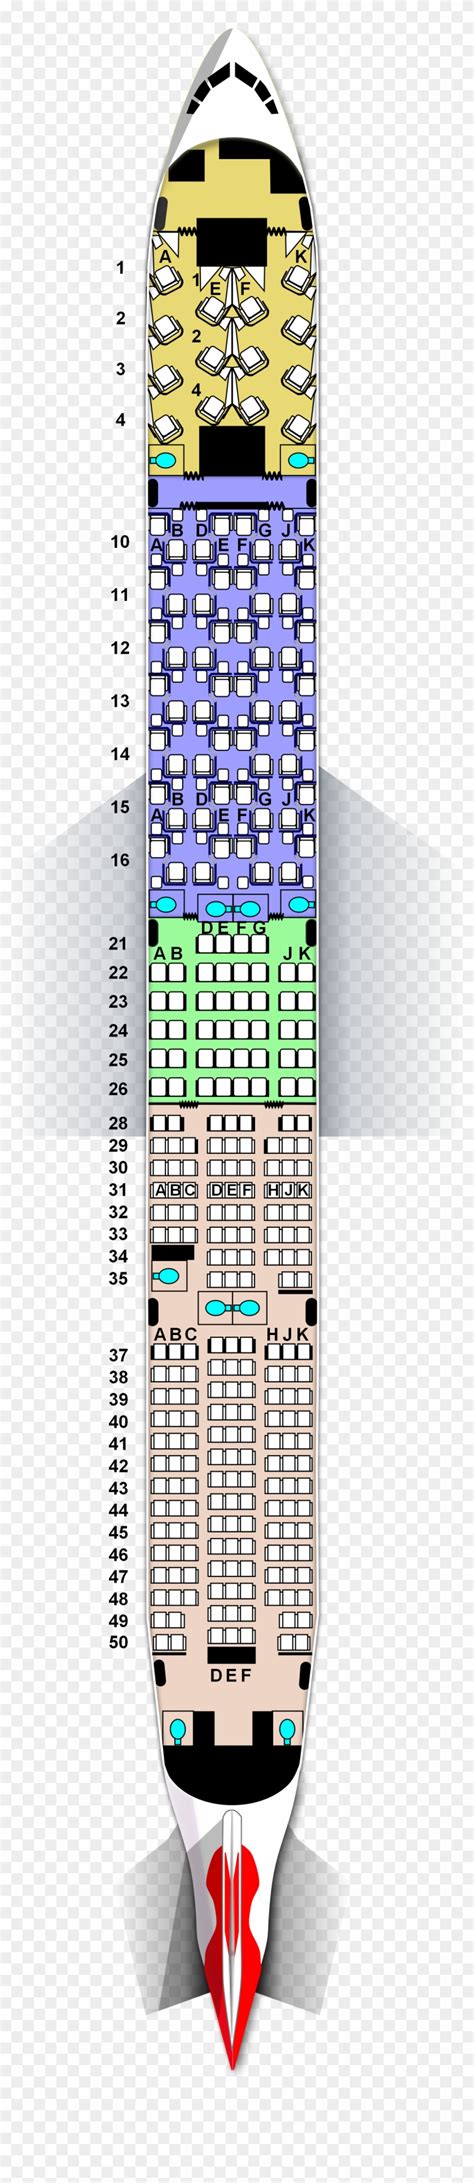 Swiss Boeing 777 Seat Maps. Swiss operates only one model of Boeing, the 777-300ER. As of 2022, the company has 12 777-300ERs. The airline selected the aircraft due to its state-of-the-art technology and because it is one of the most reliable aircraft in the world. In addition, with a new wing design, a more fuel-efficient engine, and a lighter ... . Boeing 777 200 seat map